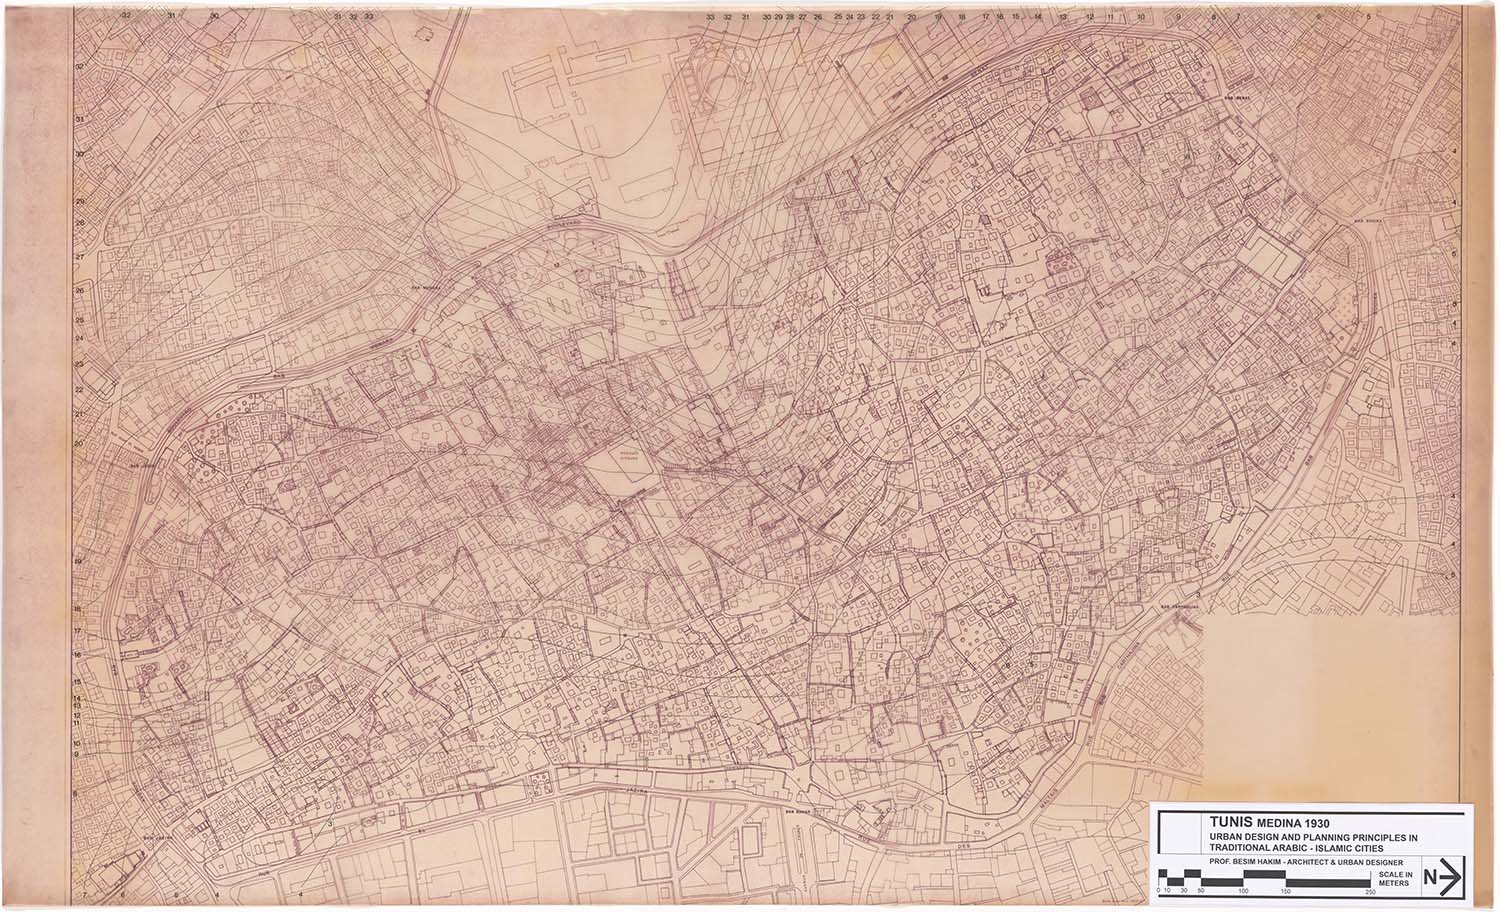 <p>Plan of Tunis Medina in 1930s with contour lines.</p>